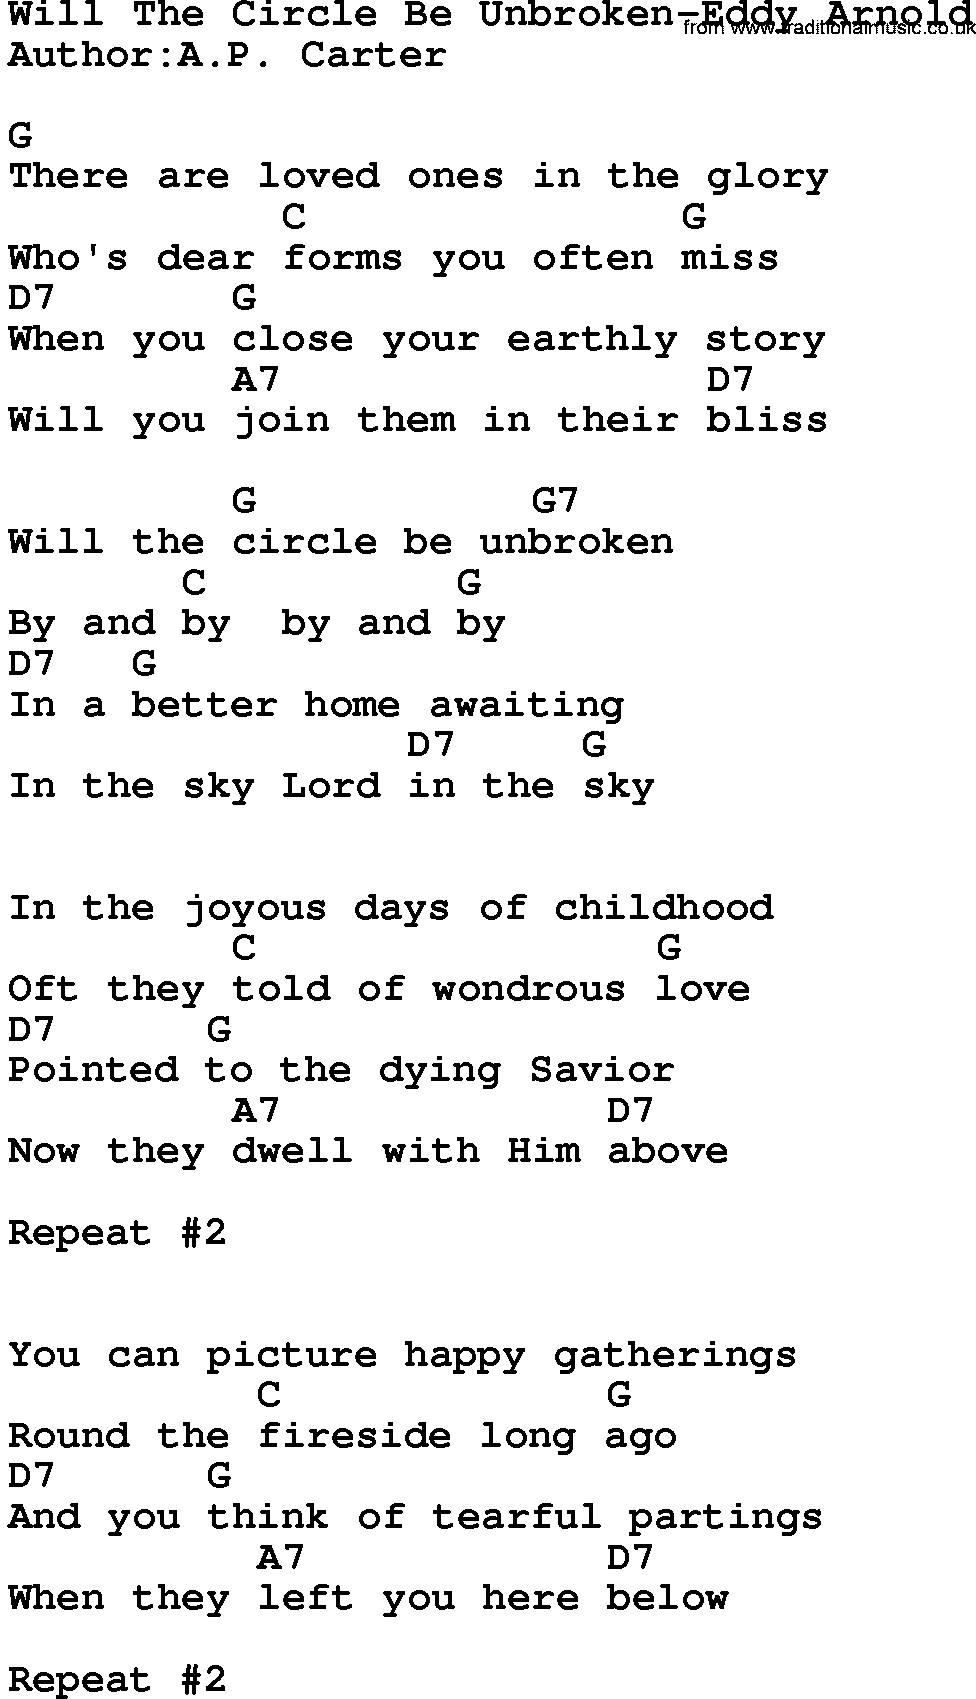 Country music song: Will The Circle Be Unbroken-Eddy Arnold lyrics and chords